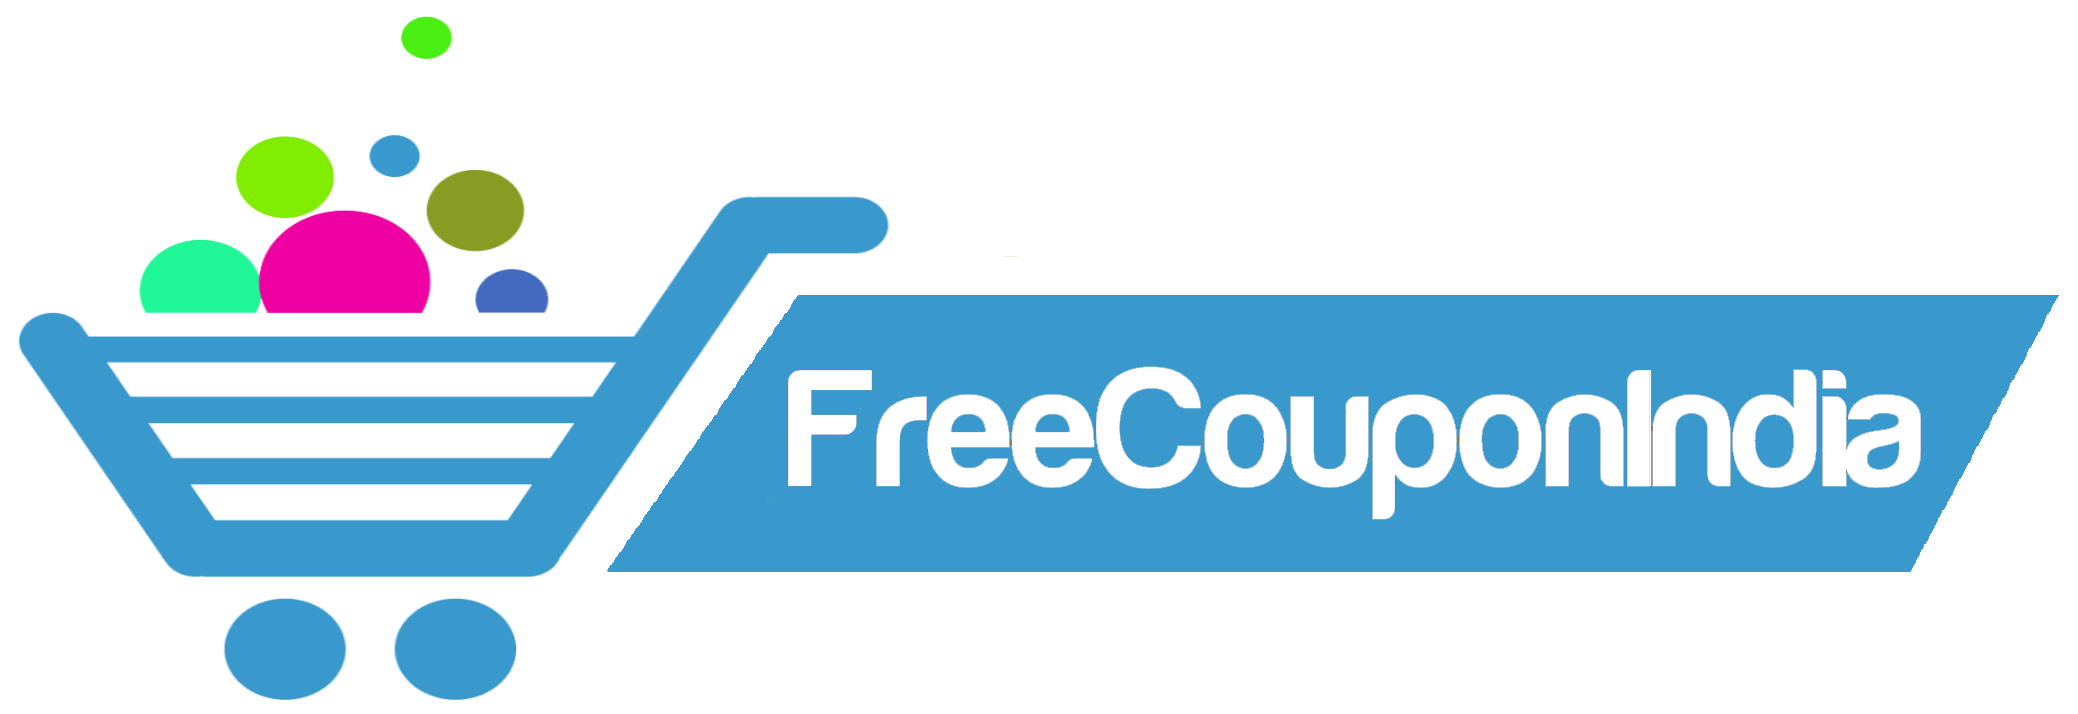 Find Our Coupons on Free Coupon India